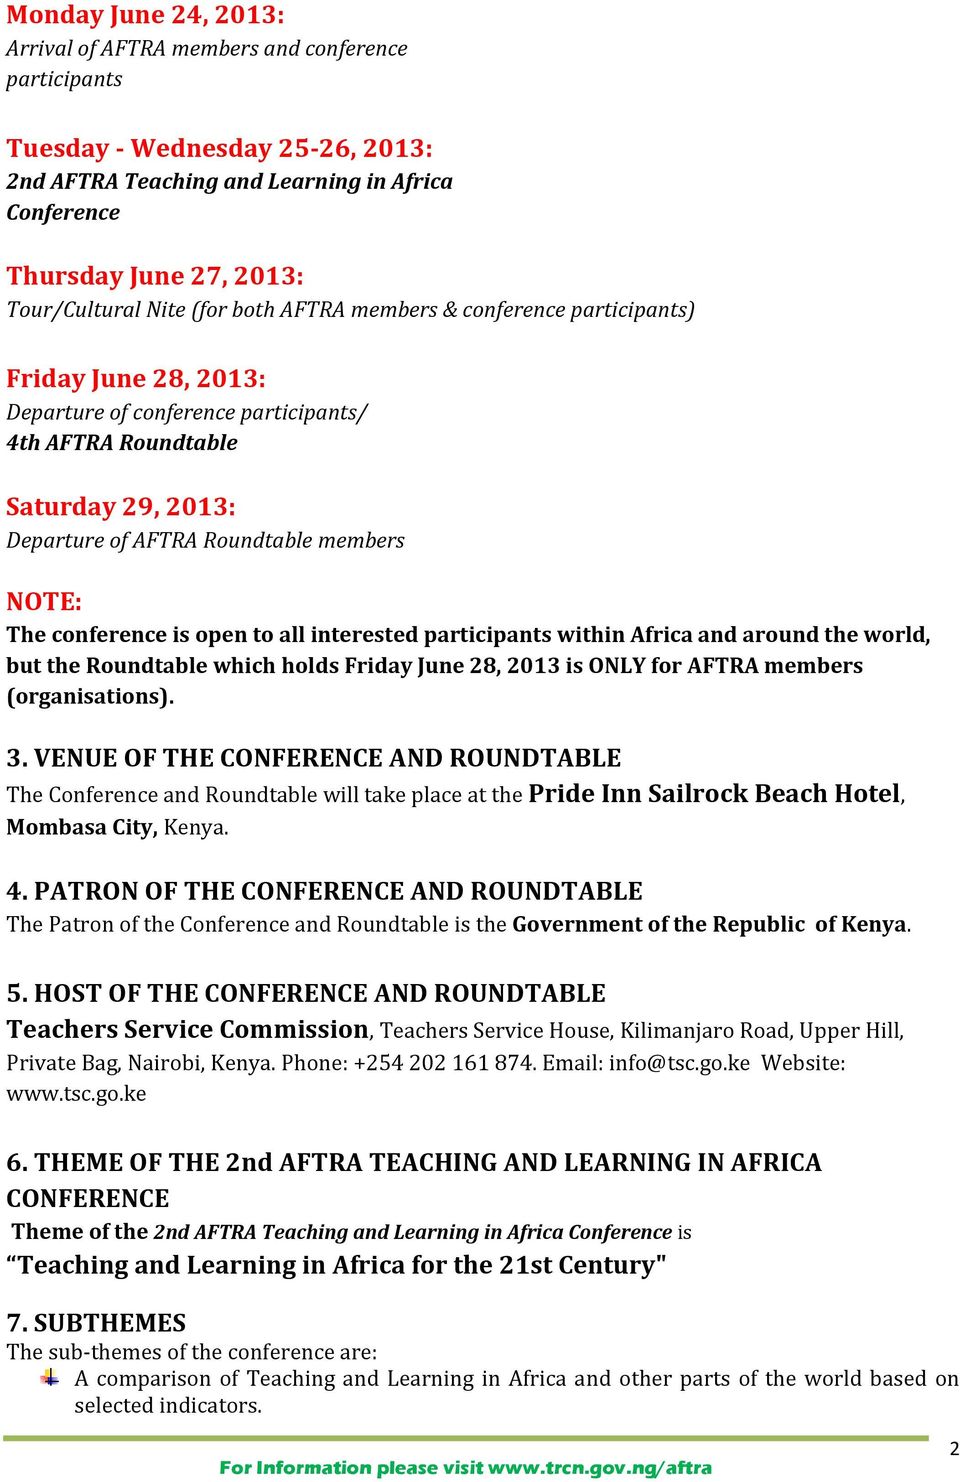 The conference is open to all interested participants within Africa and around the world, but the Roundtable which holds Friday June 28, 2013 is ONLY for AFTRA members (organisations). 3.